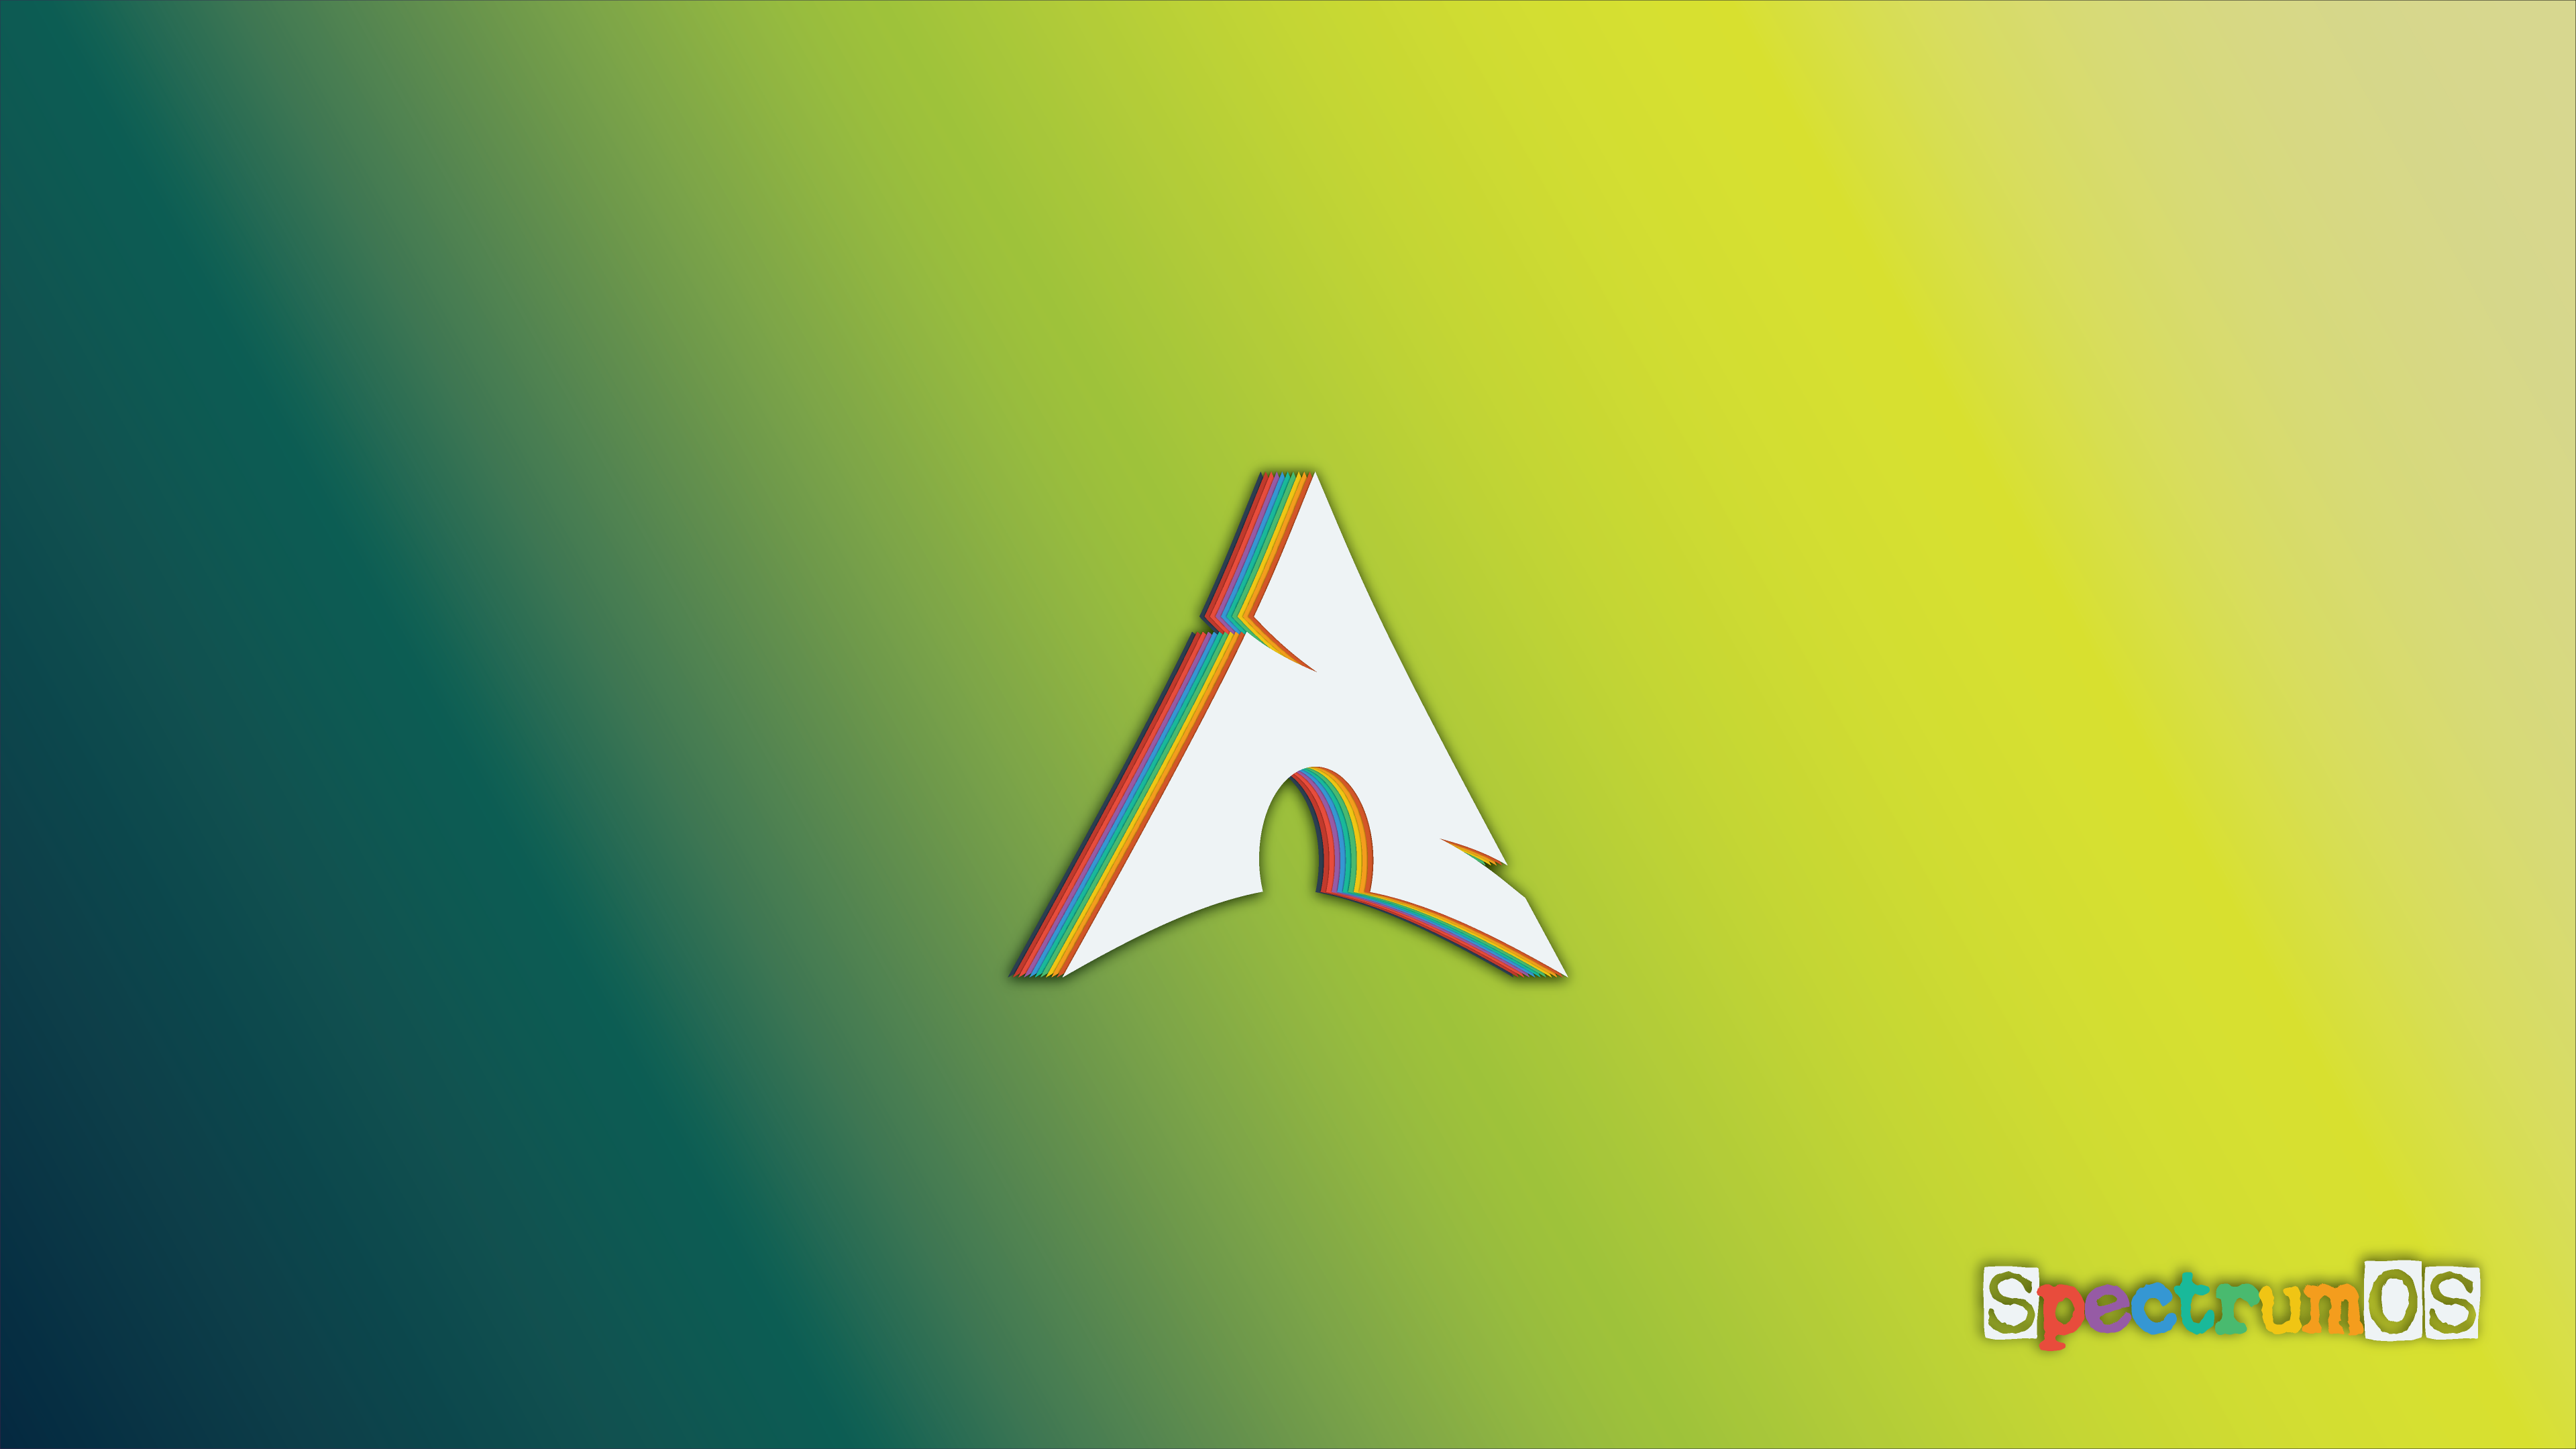 General 3840x2160 Linux SpectrumOS Arch Linux minimalism simple background logo colorful operating system